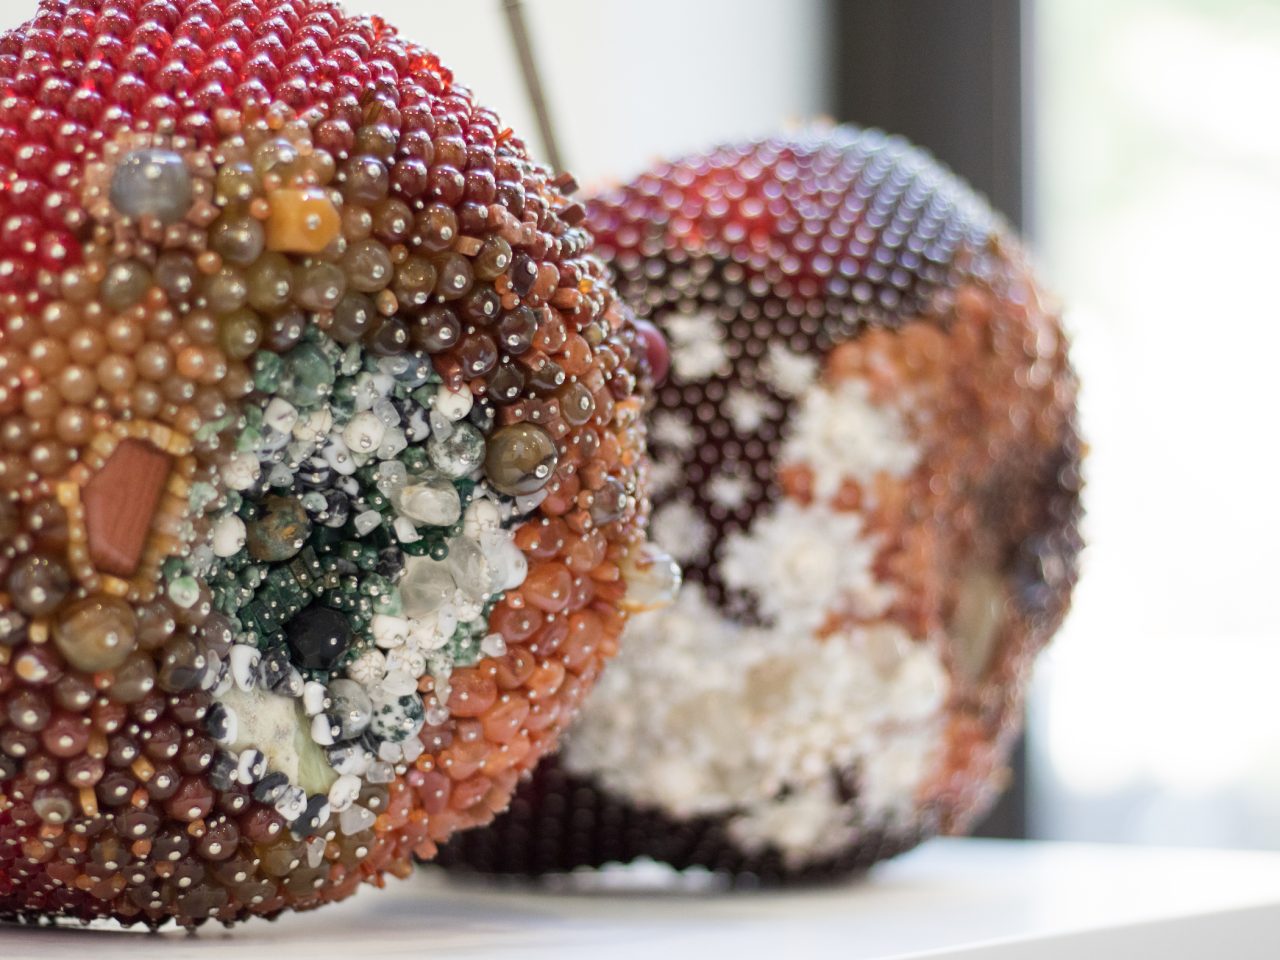 A large fruit sculpture in the shape of cherries. They are covered entirely by beads and crystals.